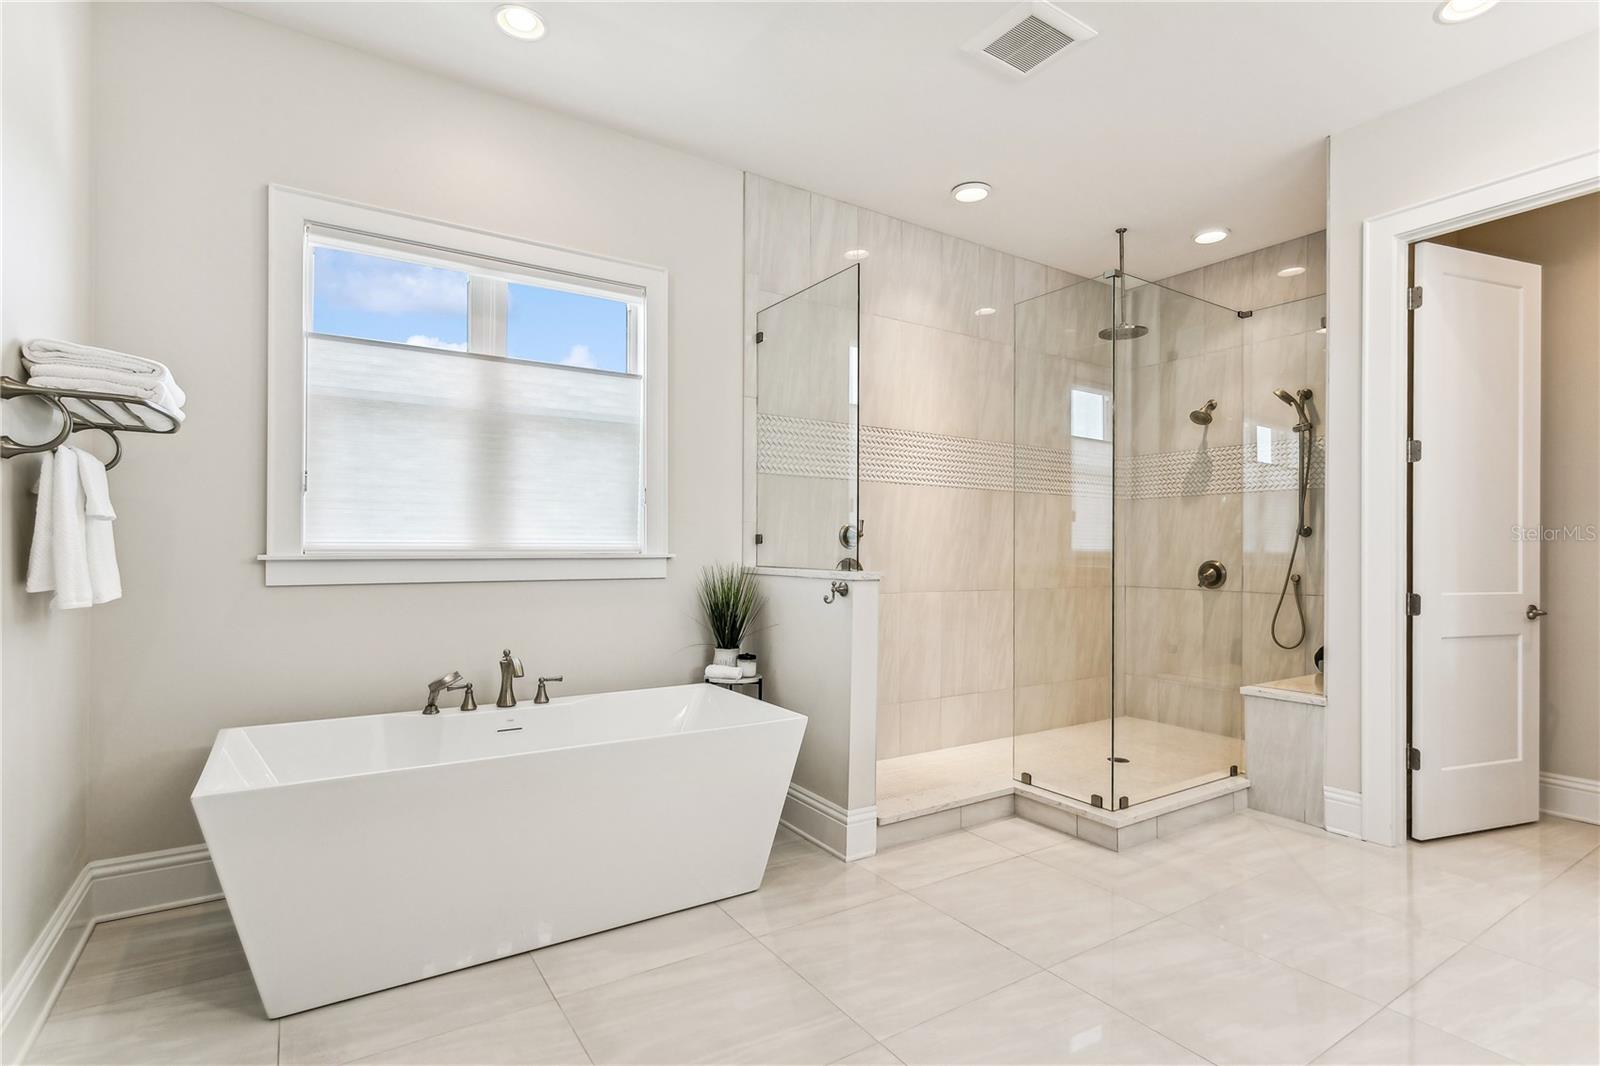 Gorgeous primary bath with shower and soaking tub...